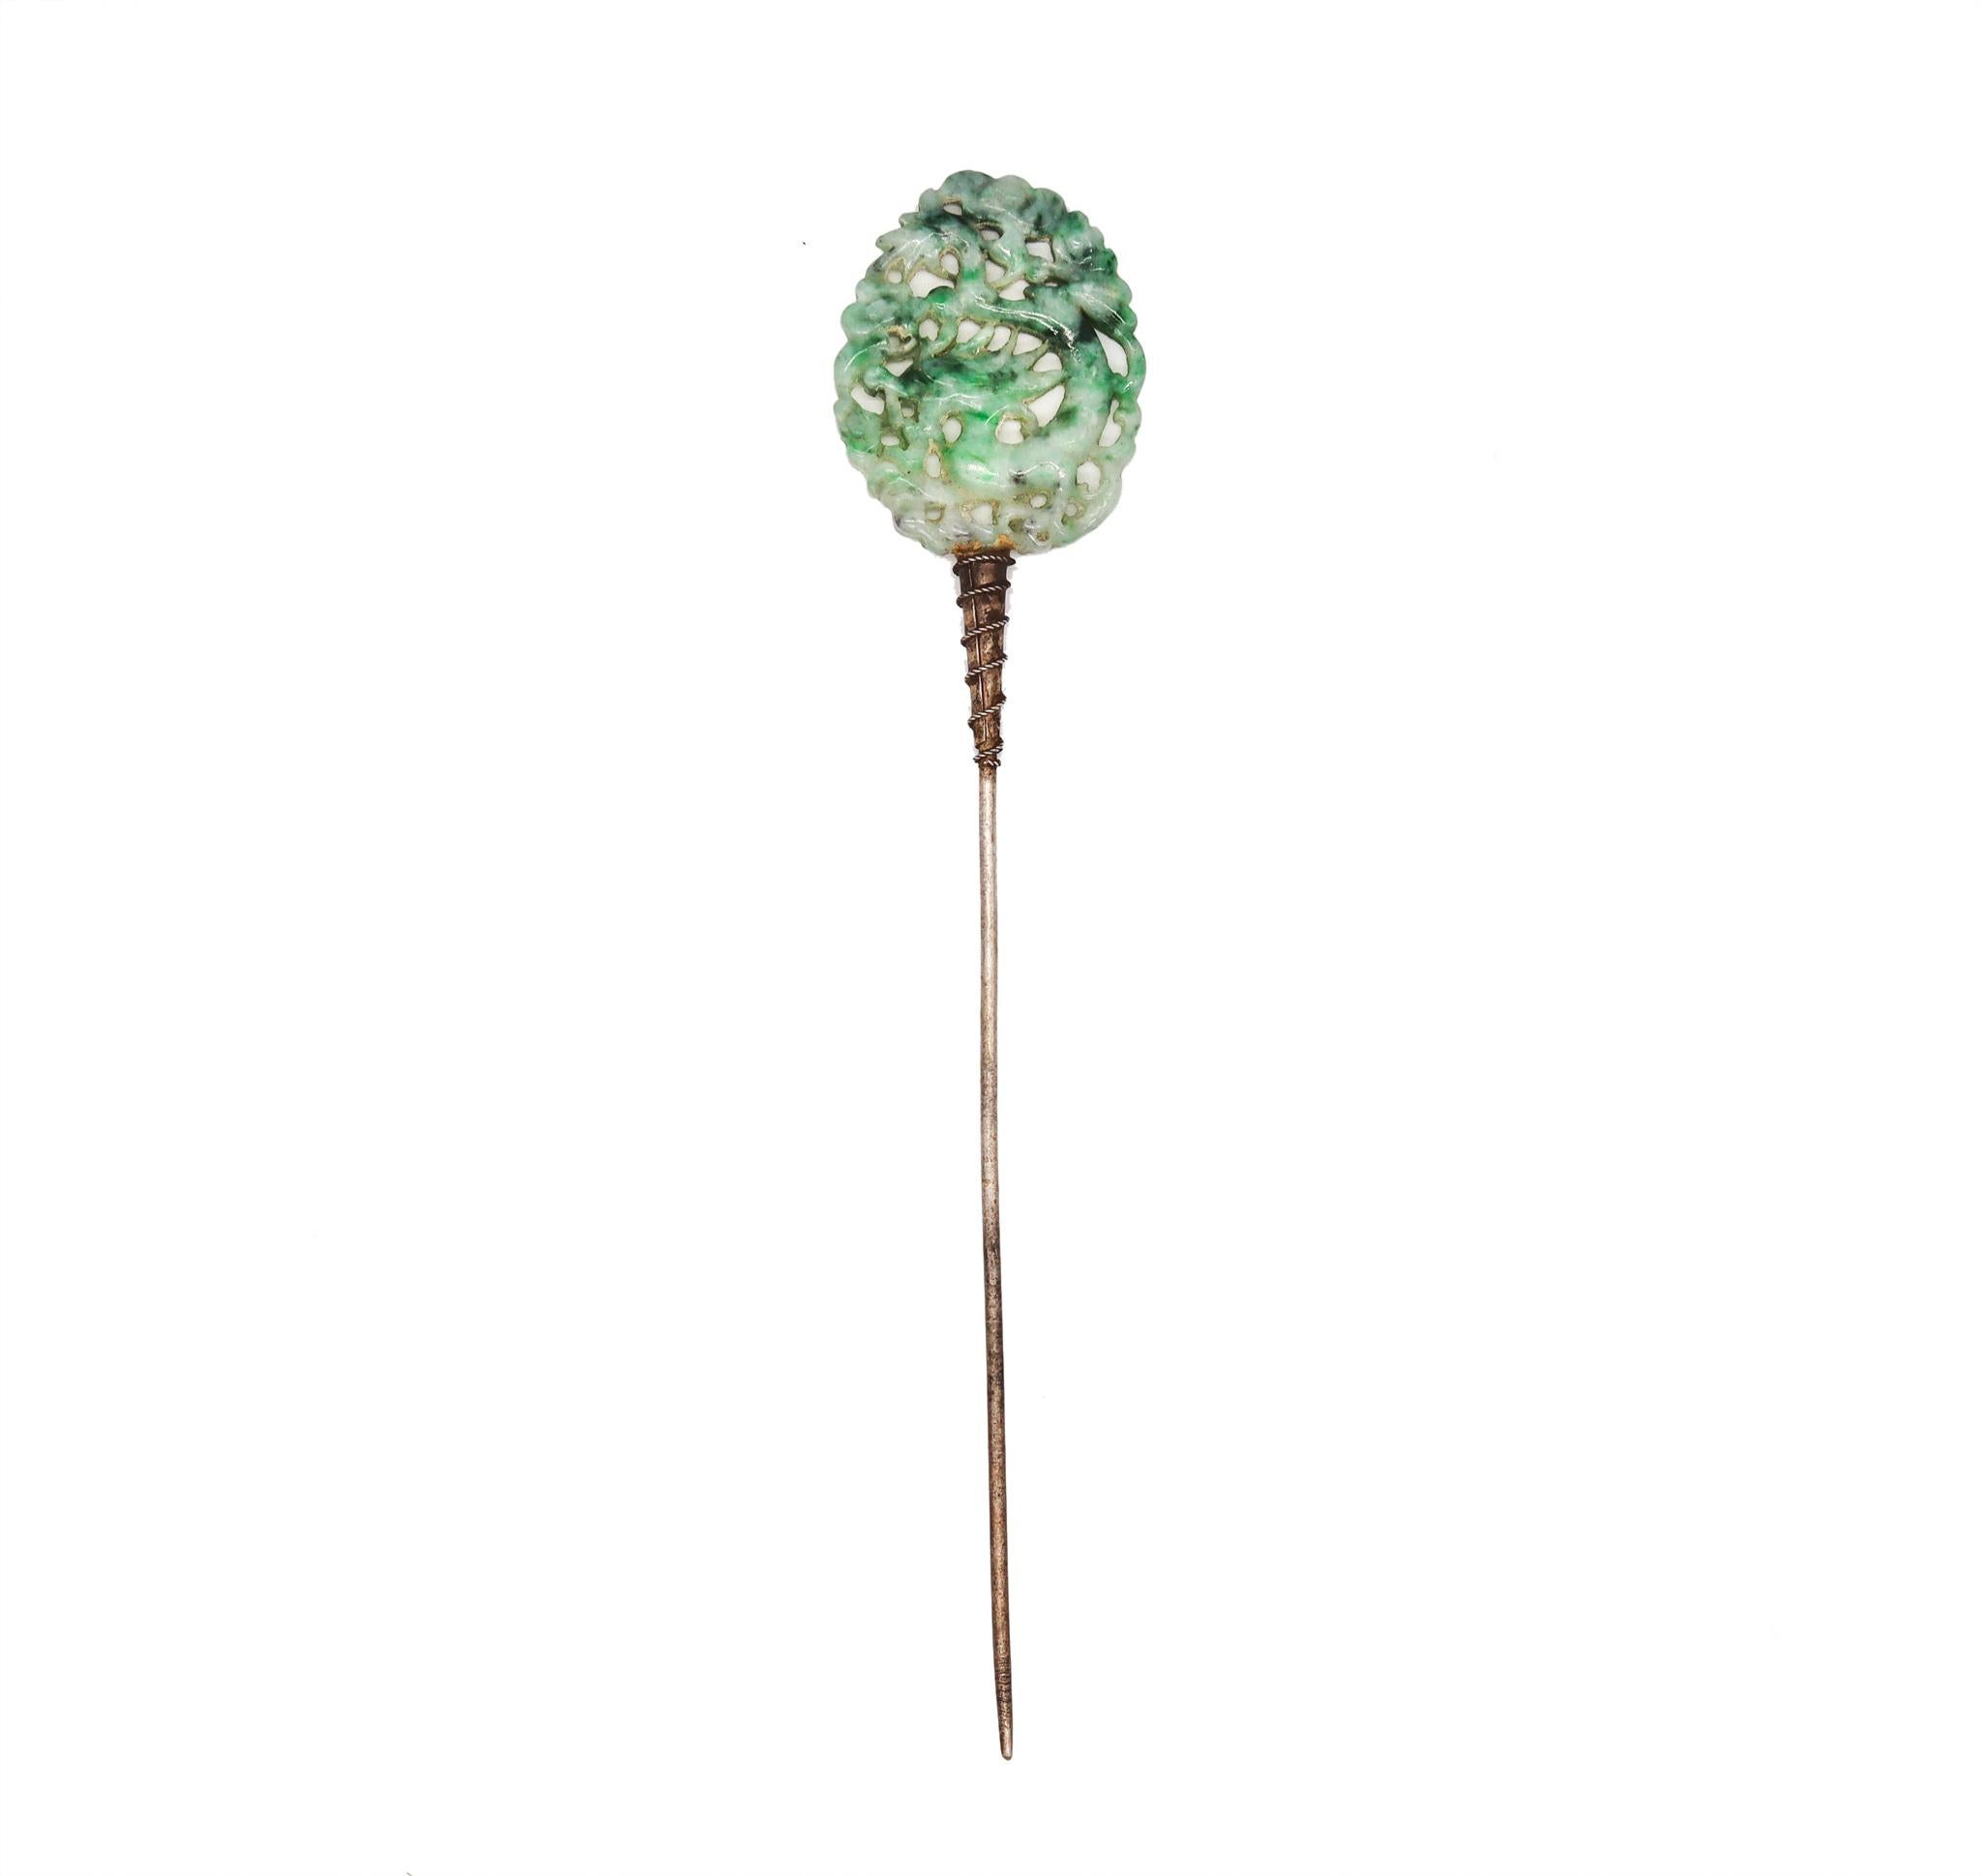 An art deco chinoiserie stick pin with green Jade.

Very nice antique piece from the European art deco period, circa 1920. This large hat-dress pin has been crafted with chinoiserie patterns in solid .800/.999 silver and mounted on top with a